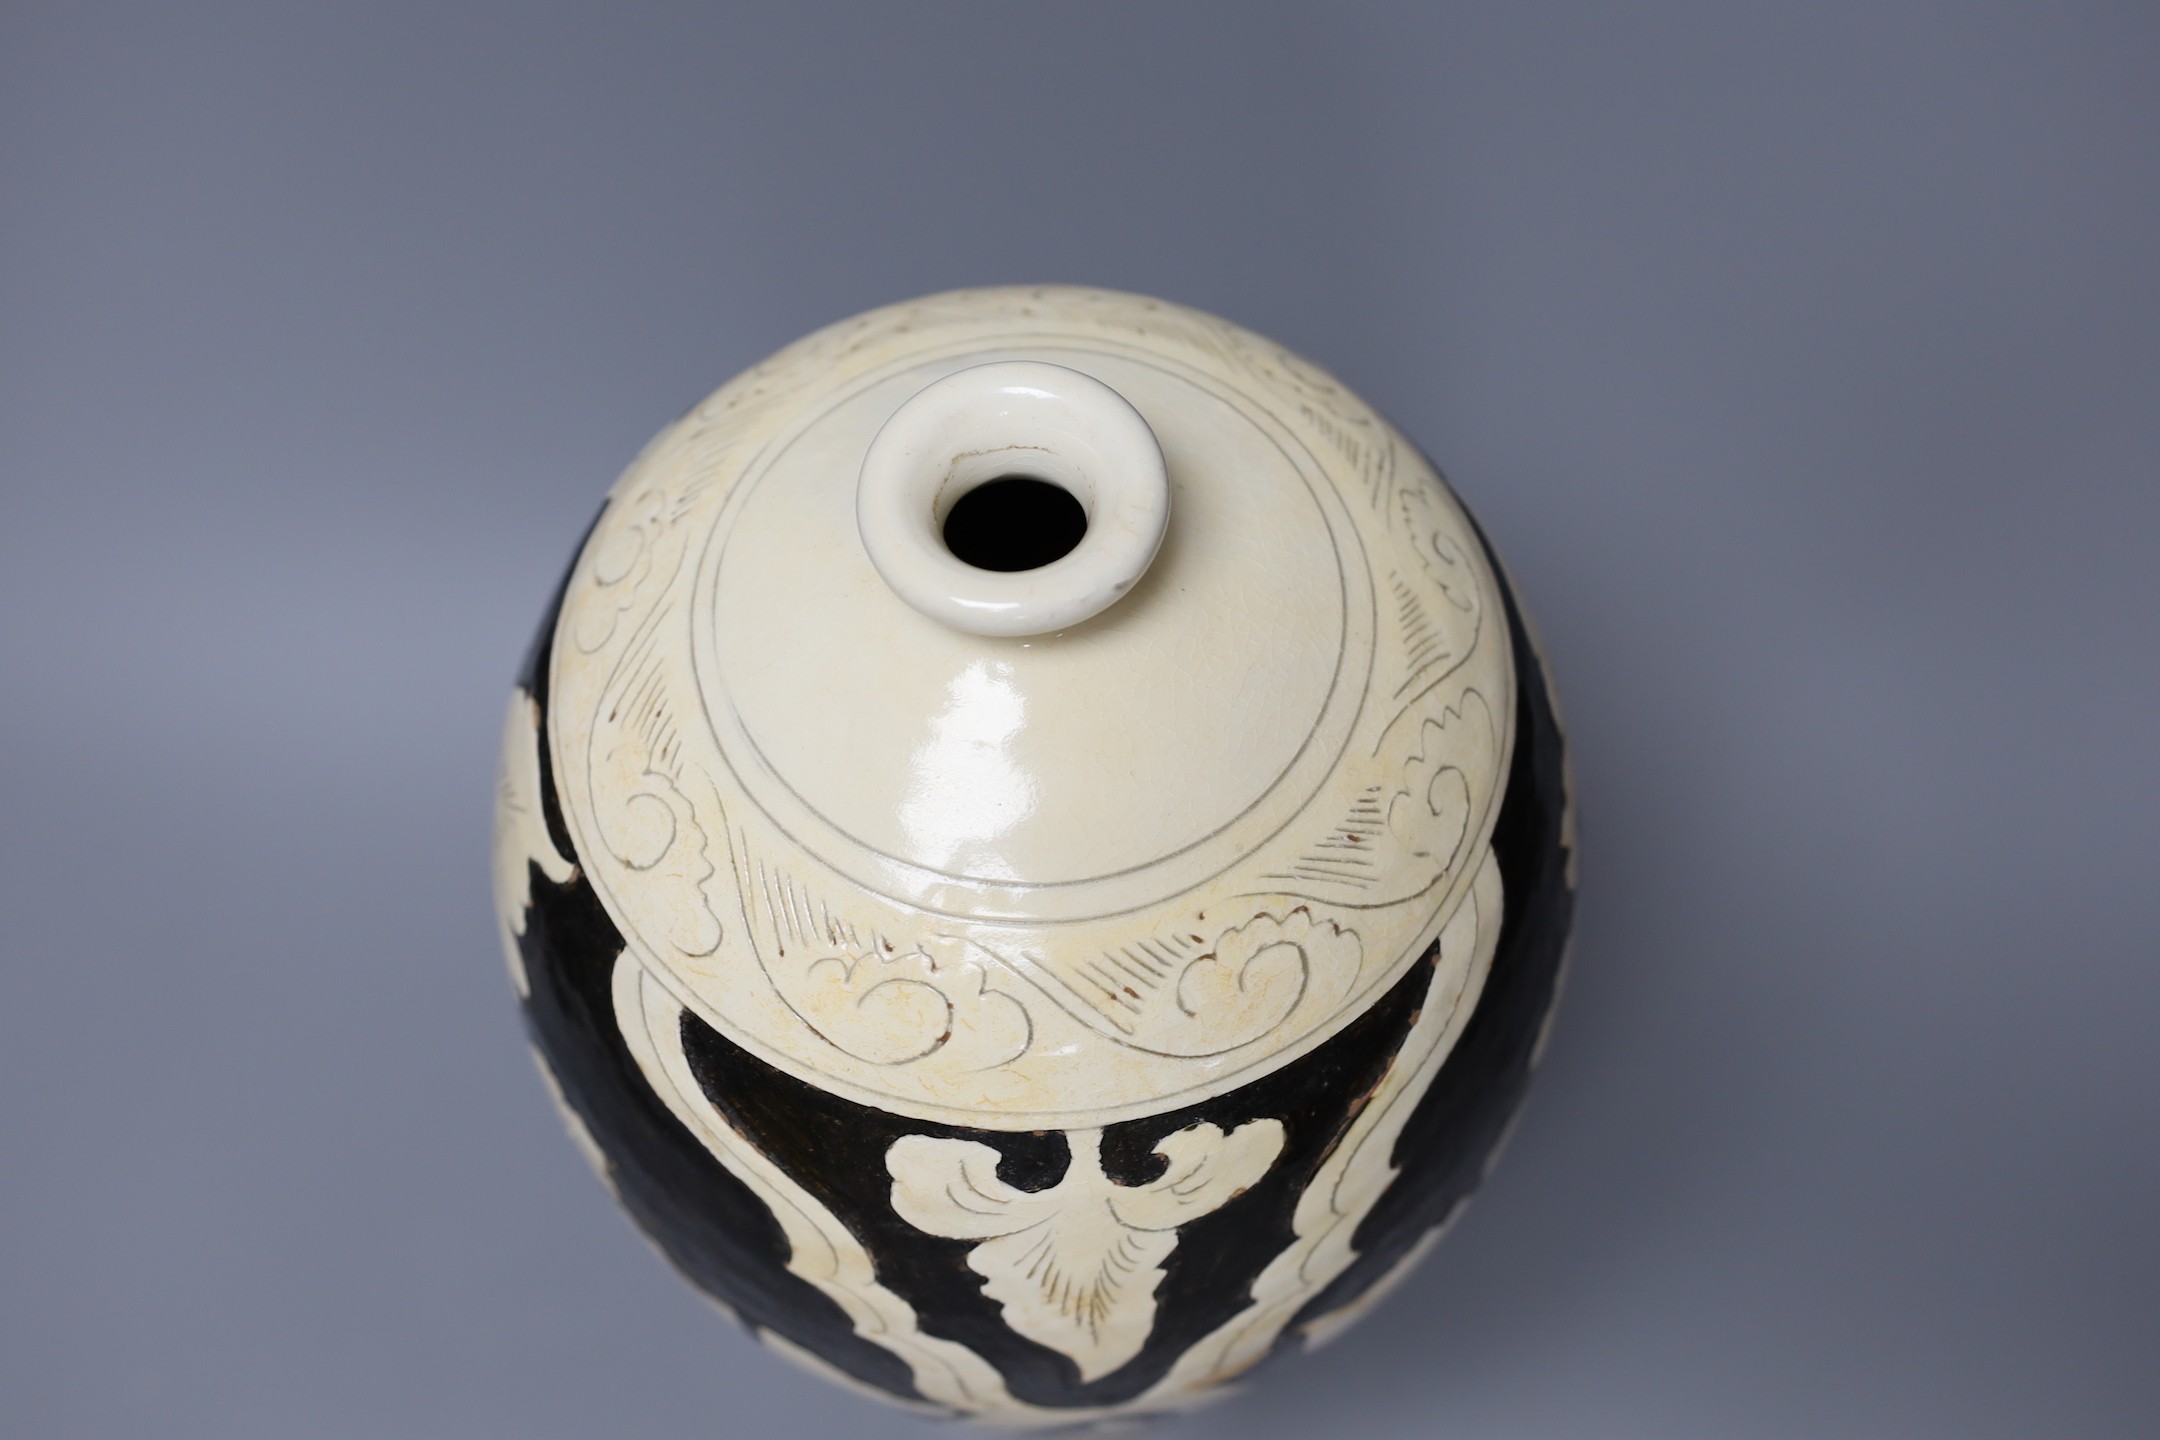 A black and white carved Chinese peony earthenware vase, 34cm tall